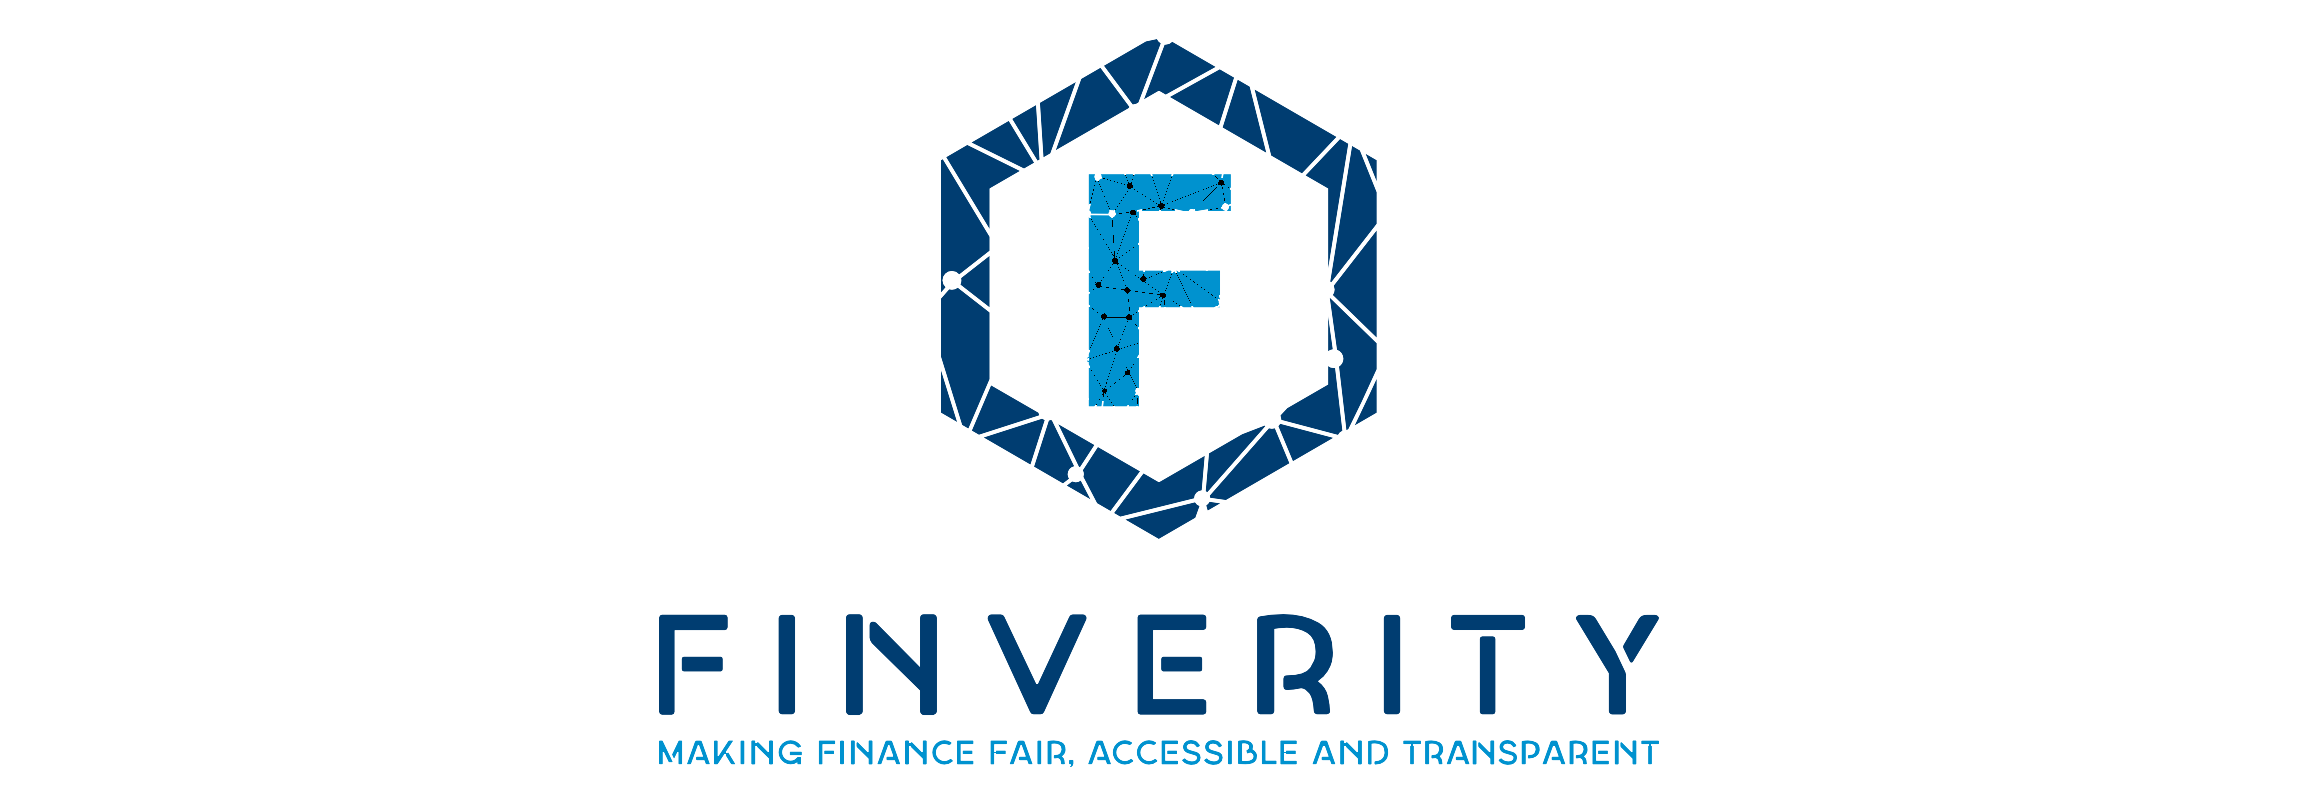 Finverity Teams Up with Abu Dhabi Global Market in Boost to Supply Chain Finance